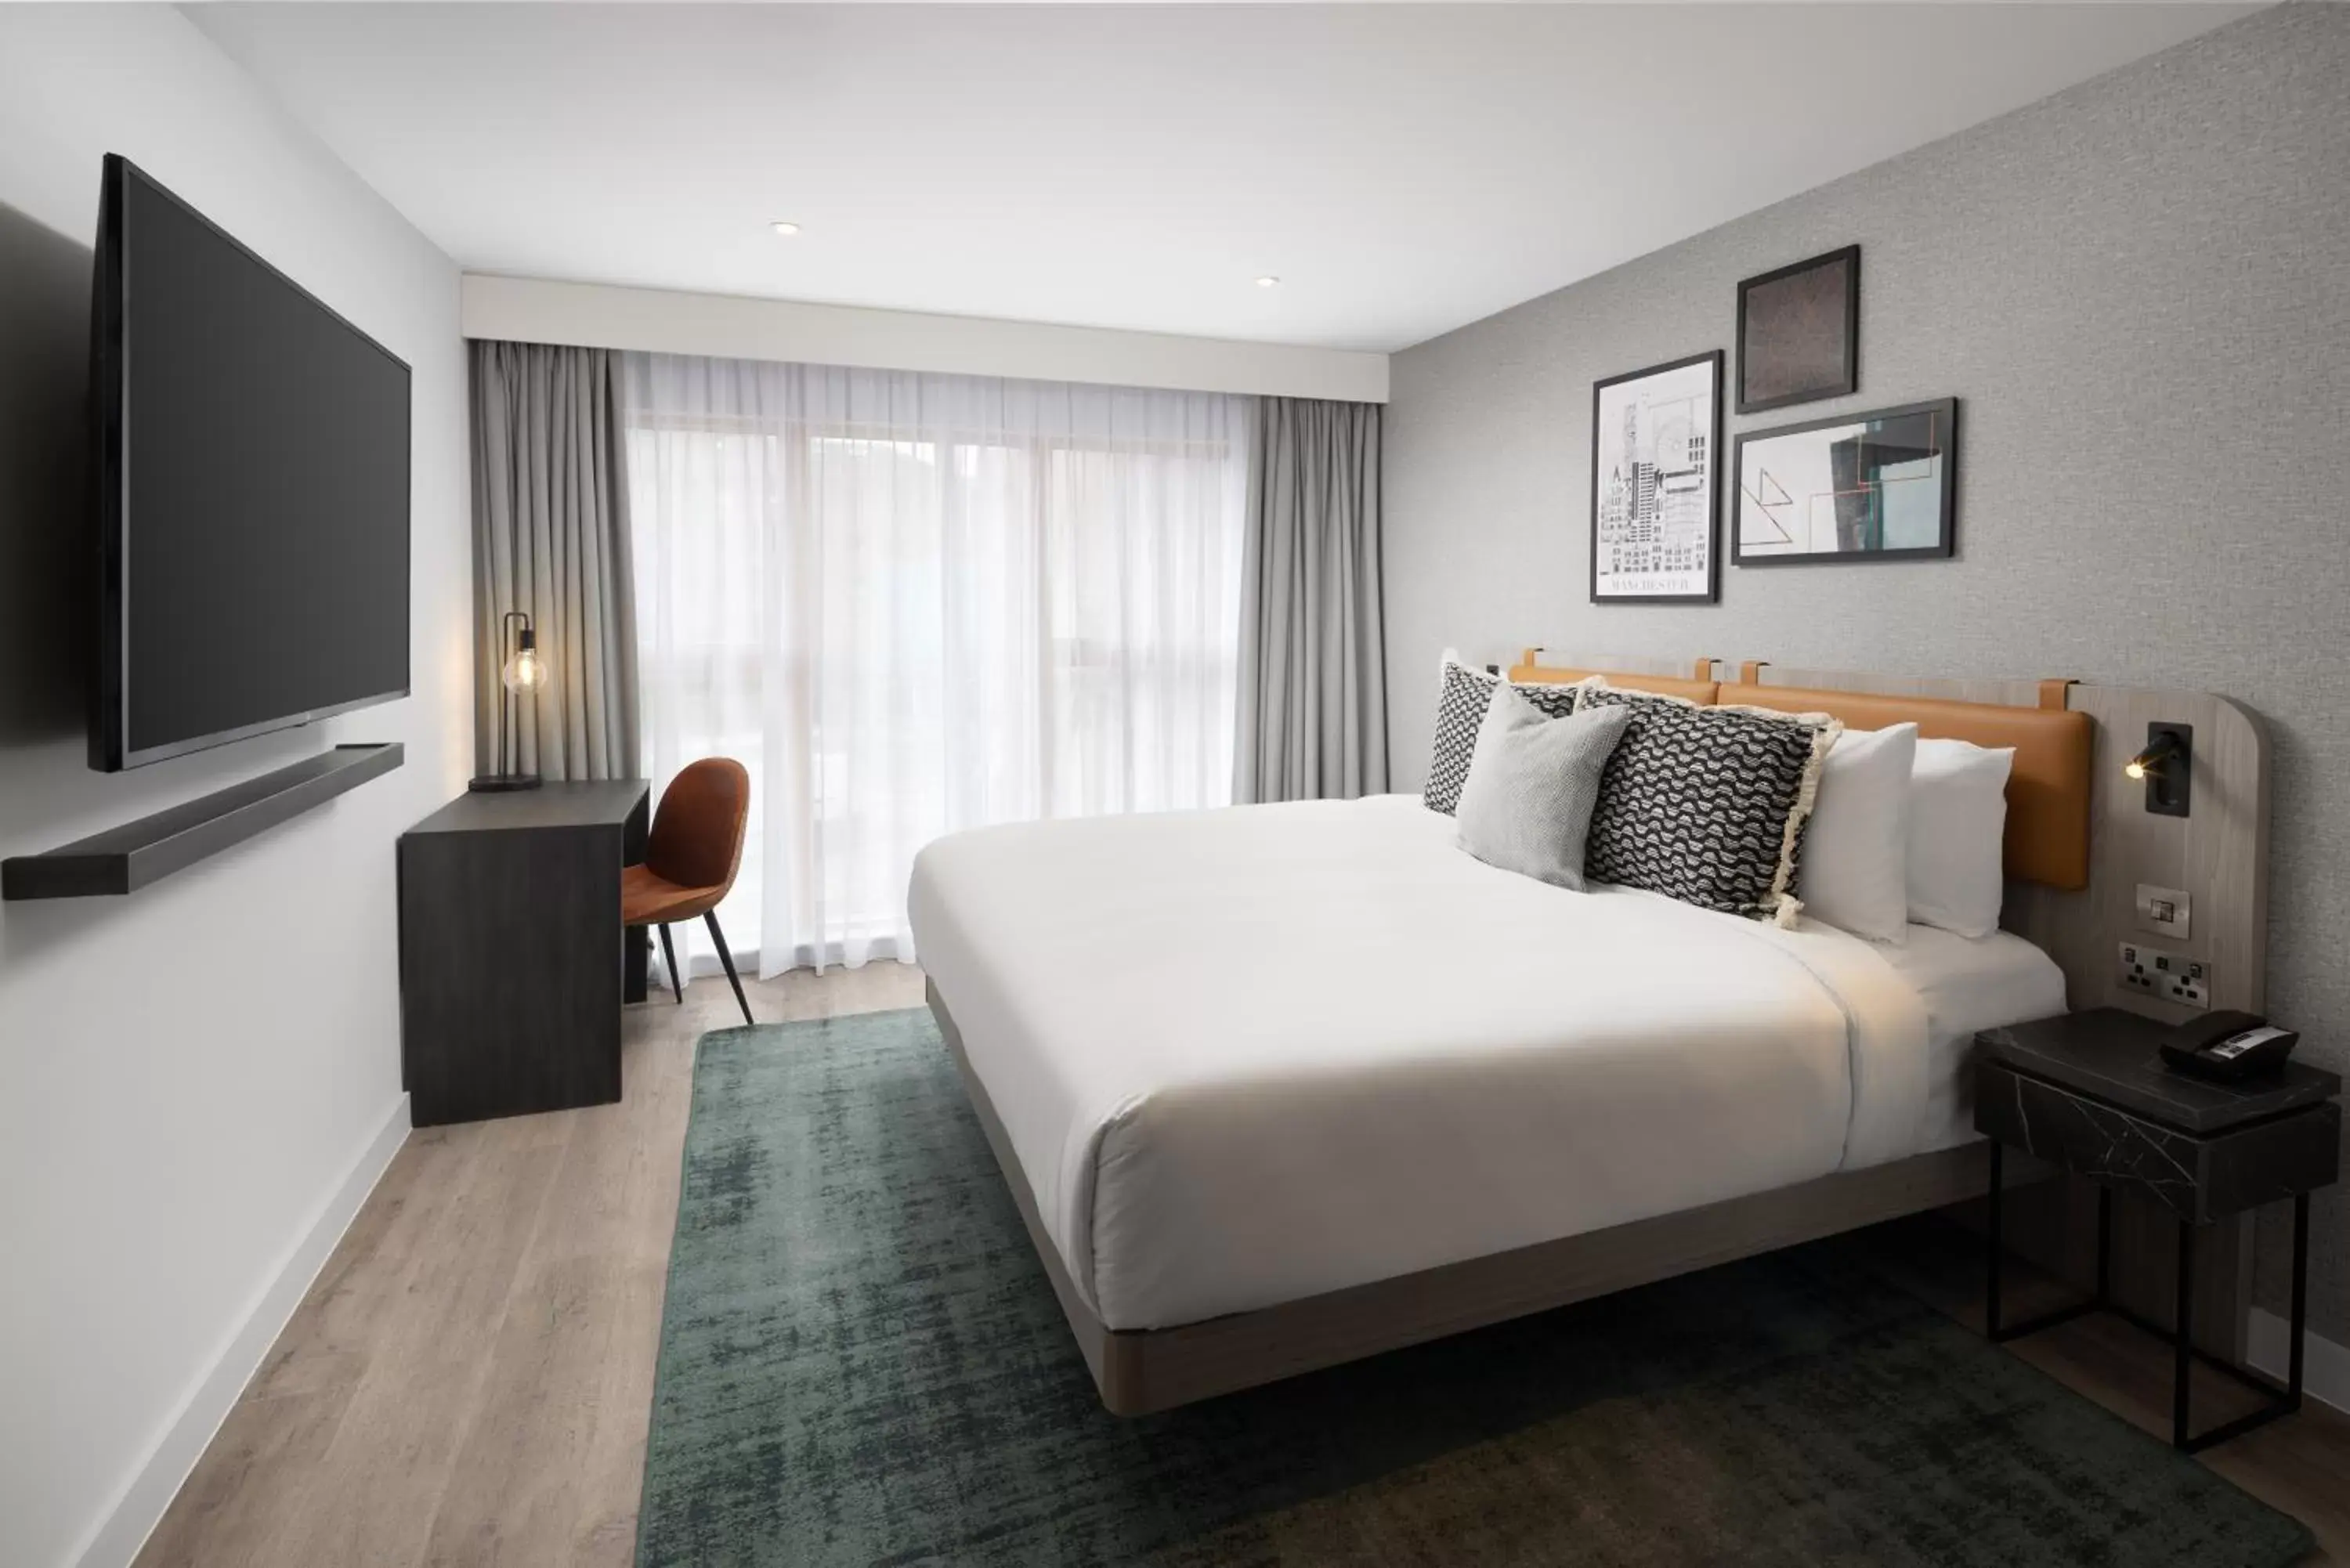 Bedroom in Residence Inn by Marriott Manchester Piccadilly